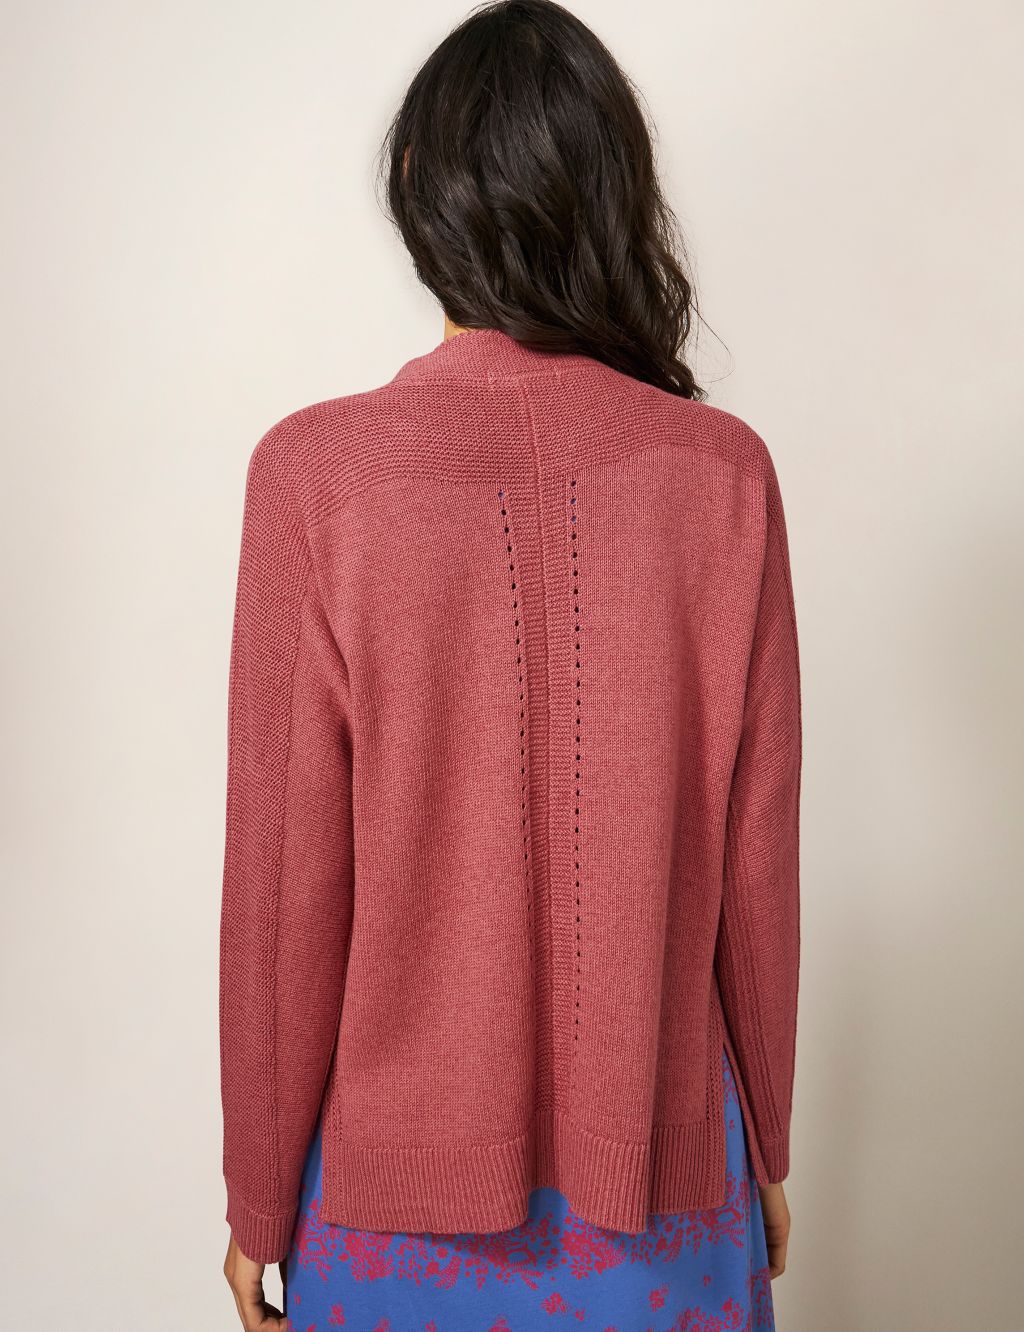 Cotton Rich Knitted Edge to Edge Cardigan image 2